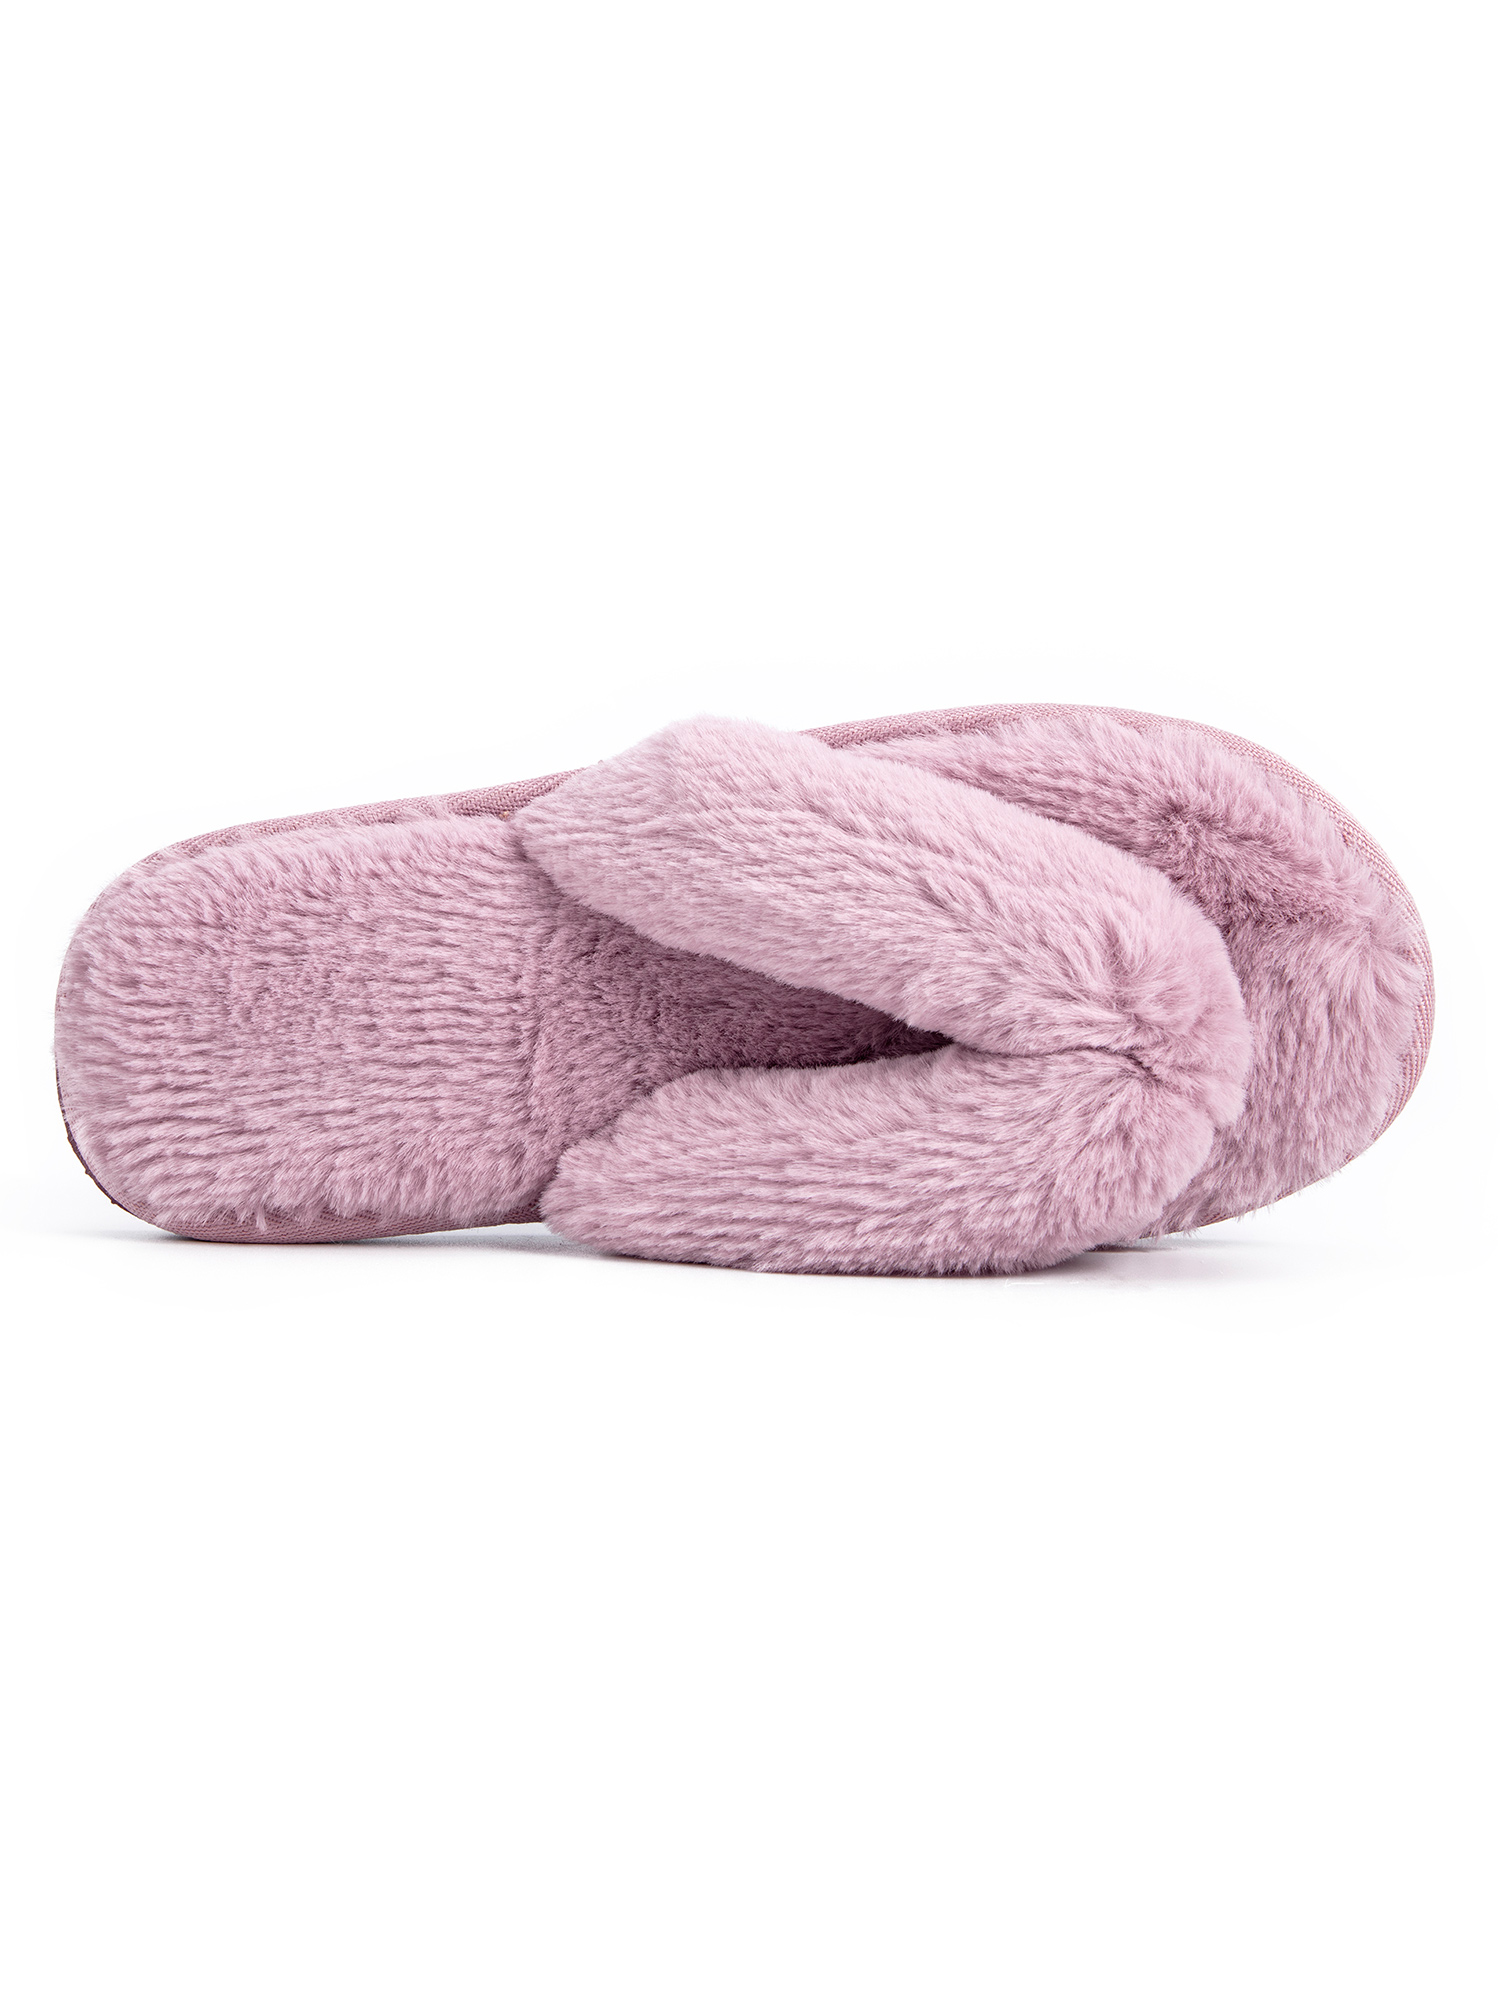 LELINTA Womens Slippers Warm Indoor House Slippers Open Toe Home Slippers for Girls Indoor Outdoor Memory Foam Slippers Cozy Slippers - image 5 of 8